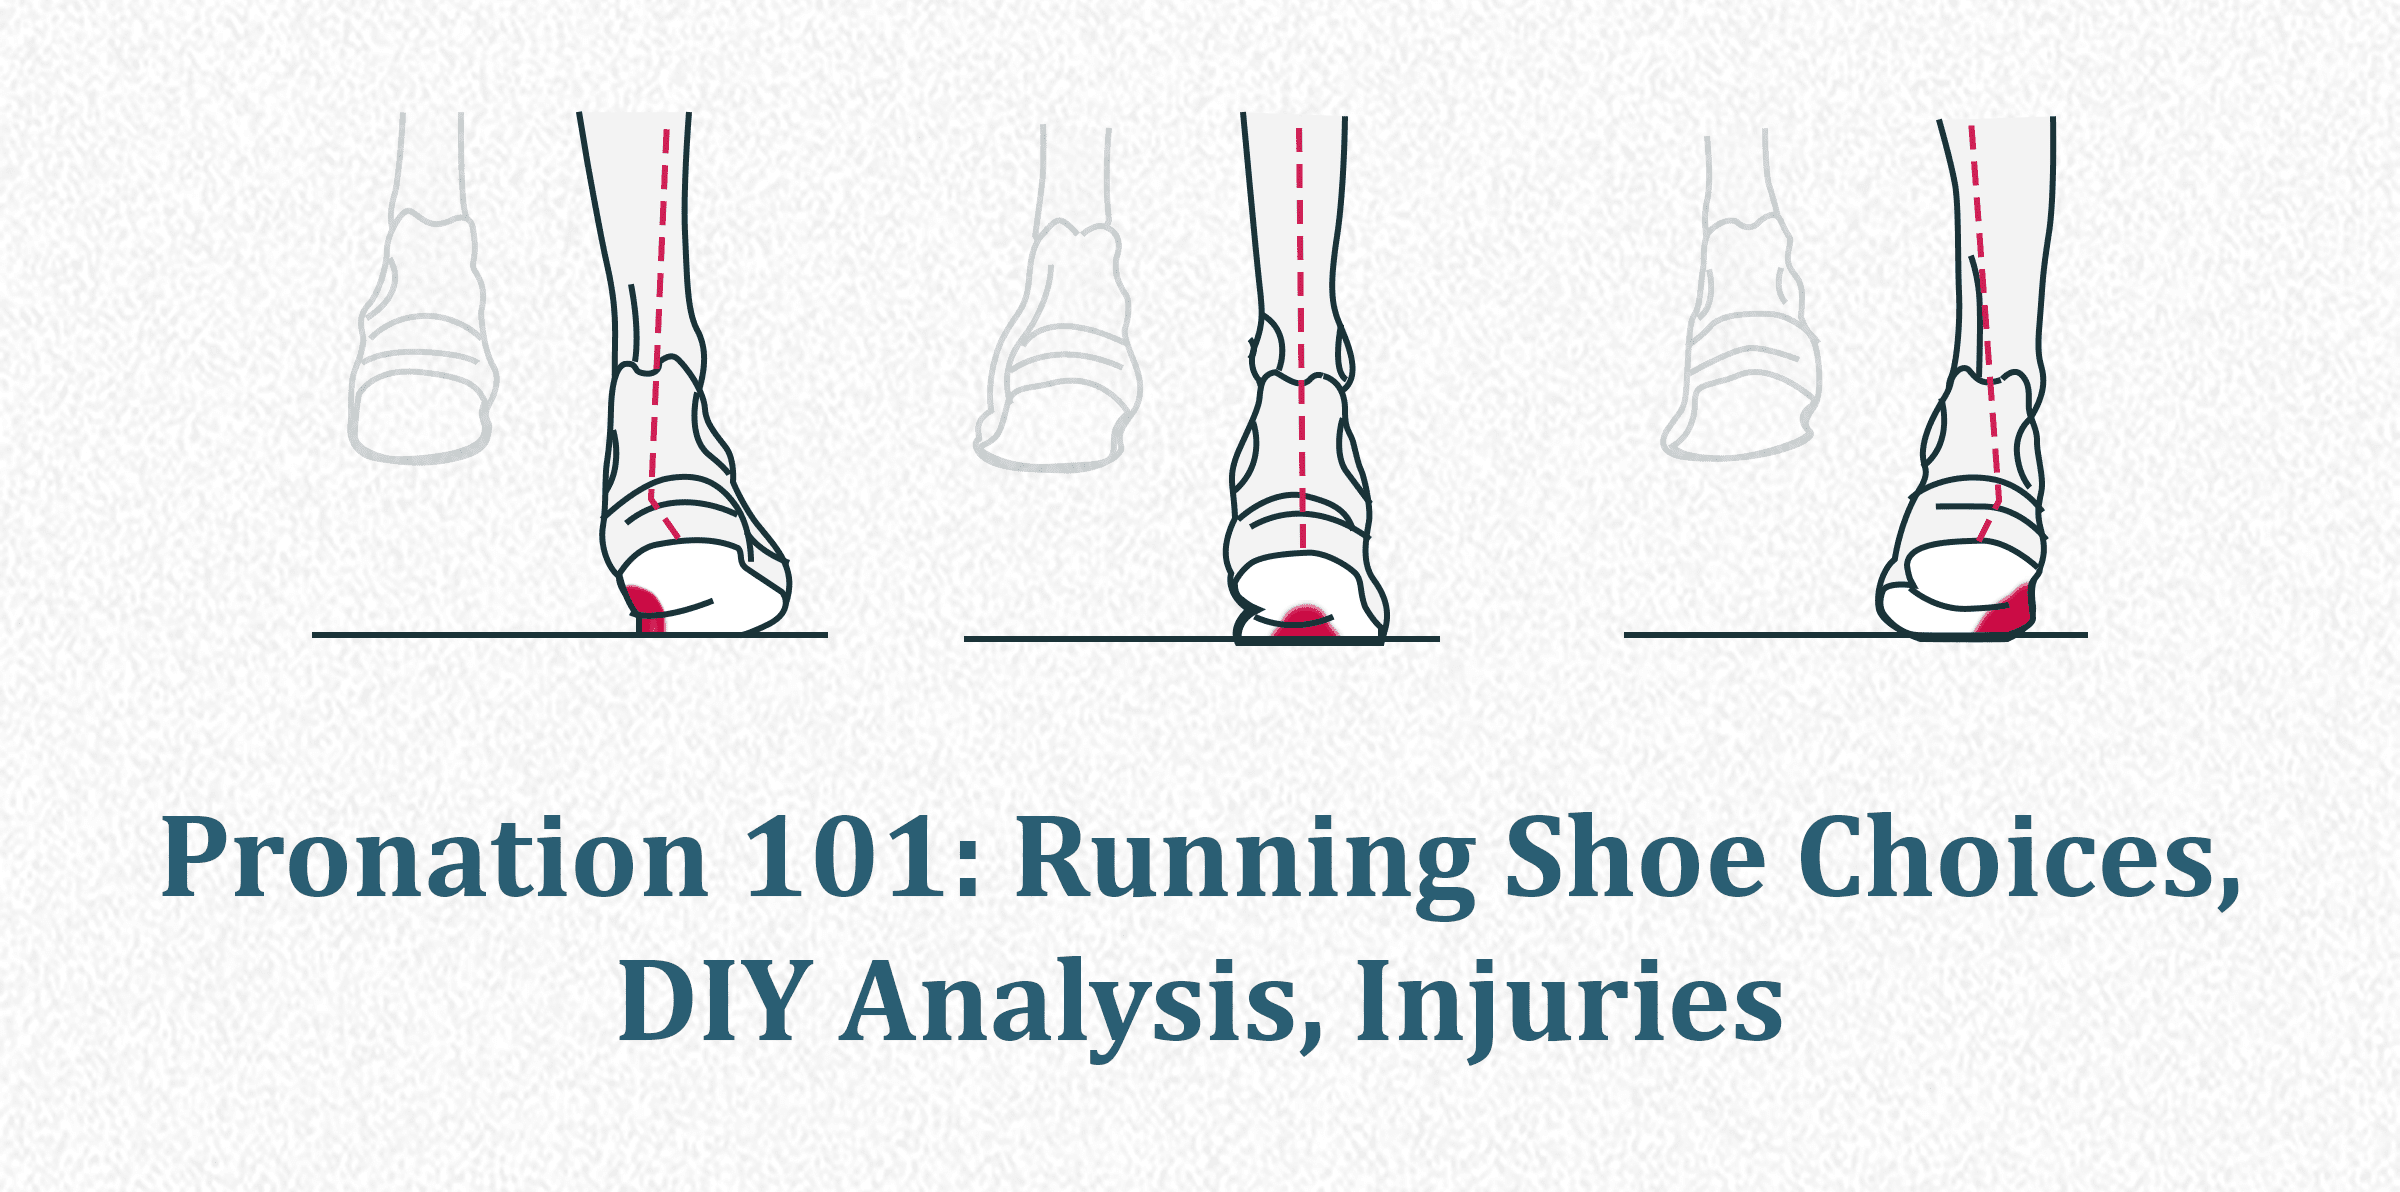 on running shoes for overpronation